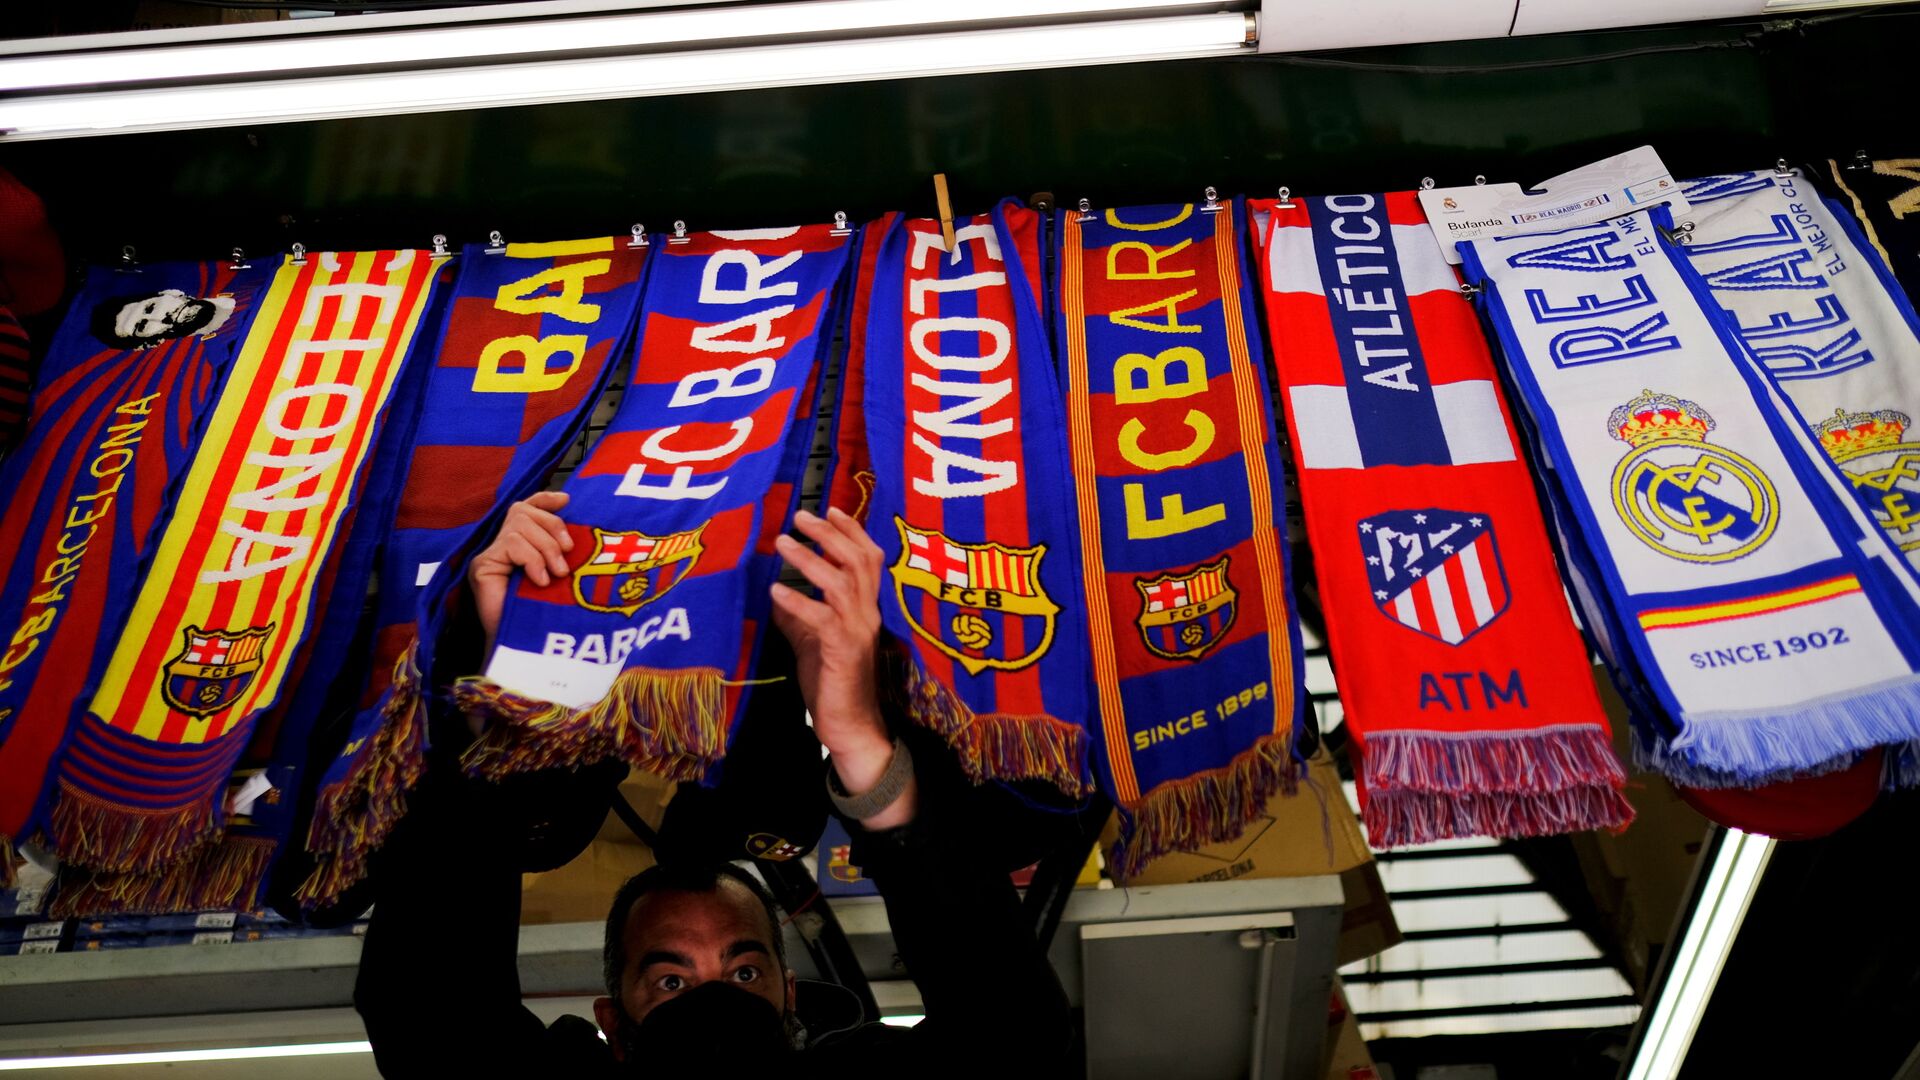 Soccer Football - FC Barcelona, Atletico Madrid and Real Madrid scarves are displayed inside a store at Las Ramblas as twelve of Europe's top football clubs launch a breakaway Super League - Barcelona, Spain - April 19, 2021 - اسپوتنیک افغانستان  , 1920, 21.03.2022